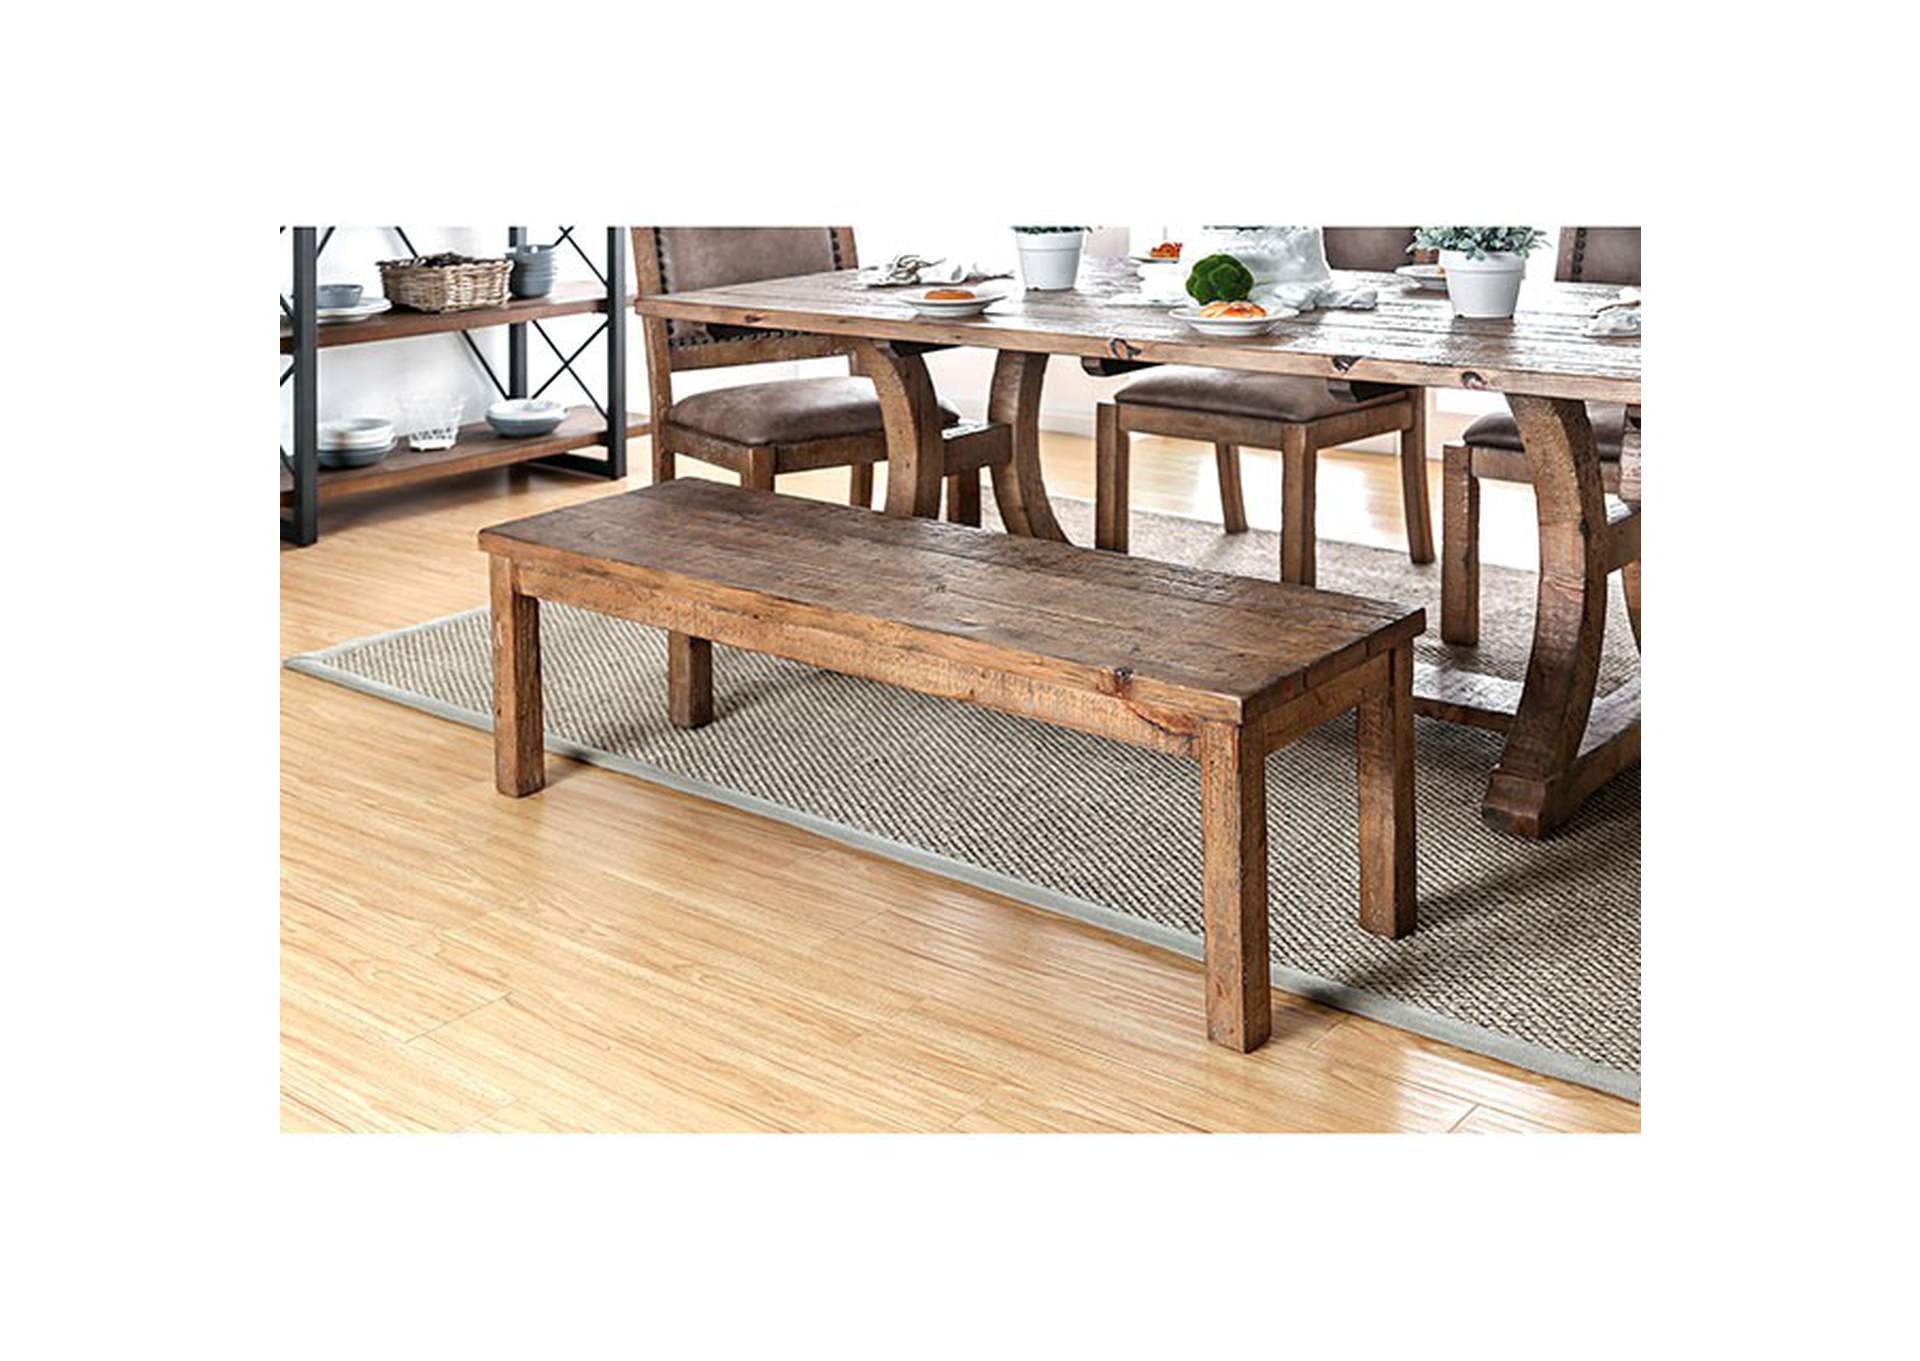 Gianna Wooden Bench,Furniture of America